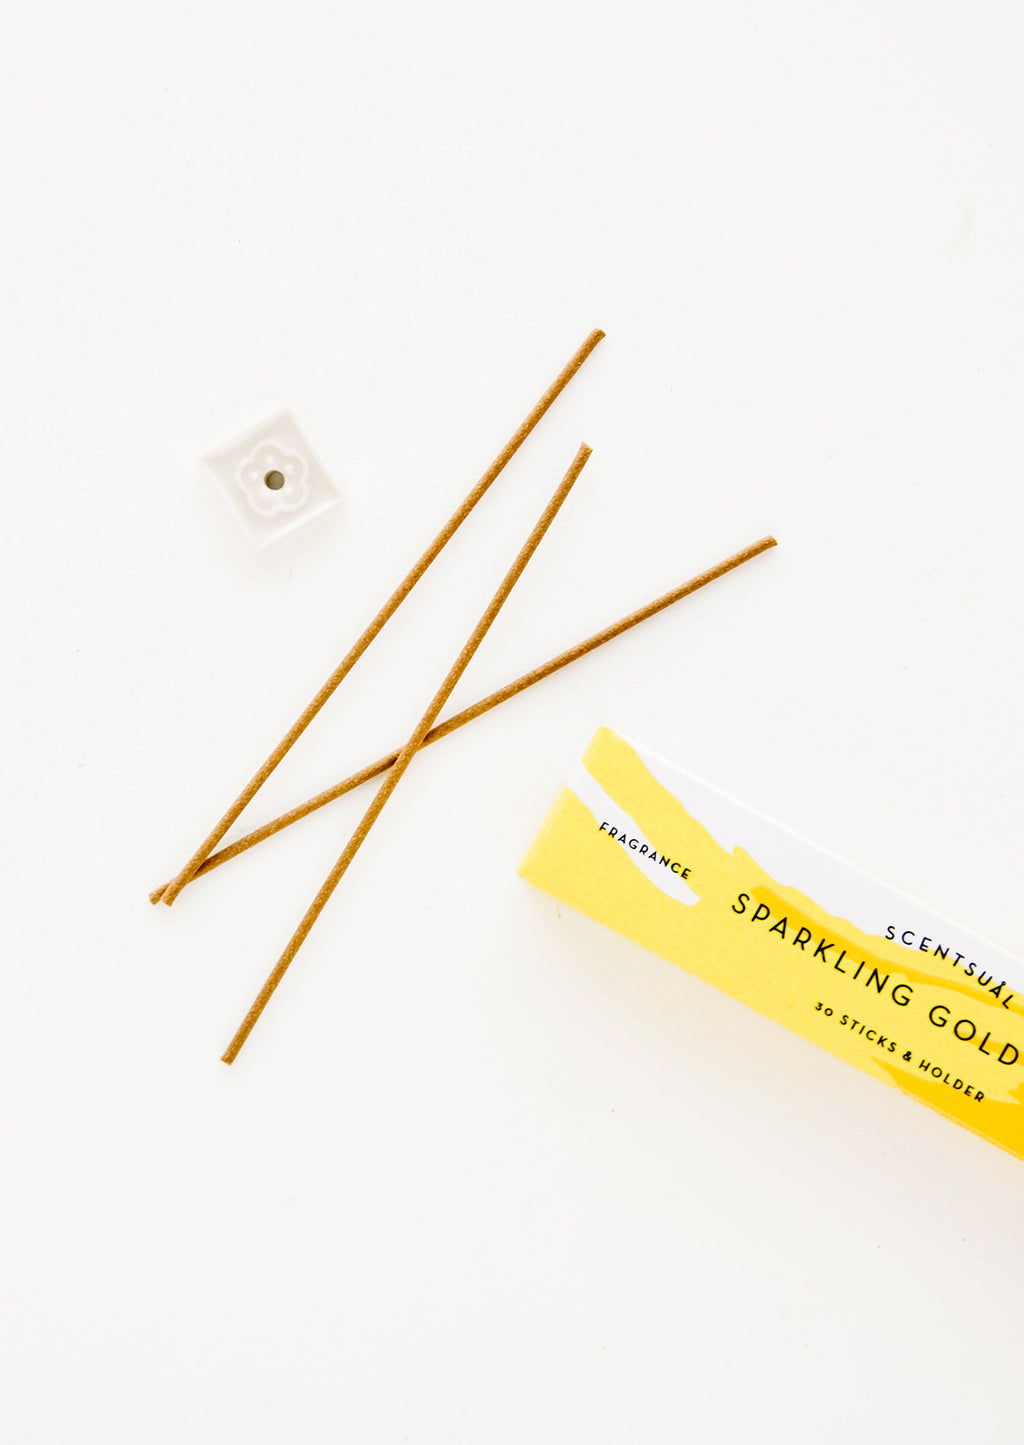 Gold Yuzu: Three thin incense sticks laid out next to a small square holder and yellow cardboard box.